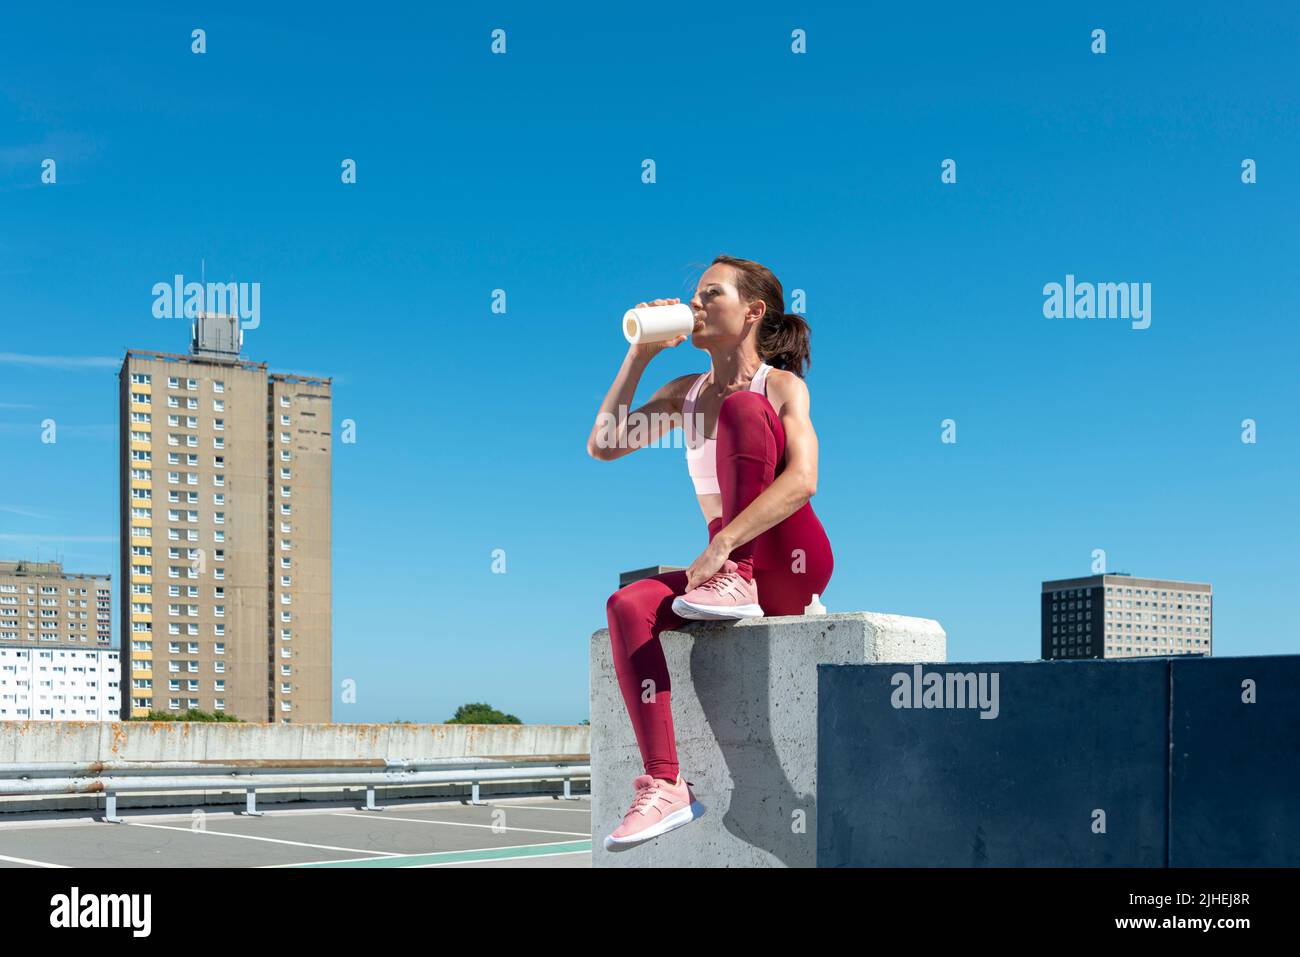 Sporty woman drinking water from a bottle, sitting resting after exercise, urban setting. Stock Photo